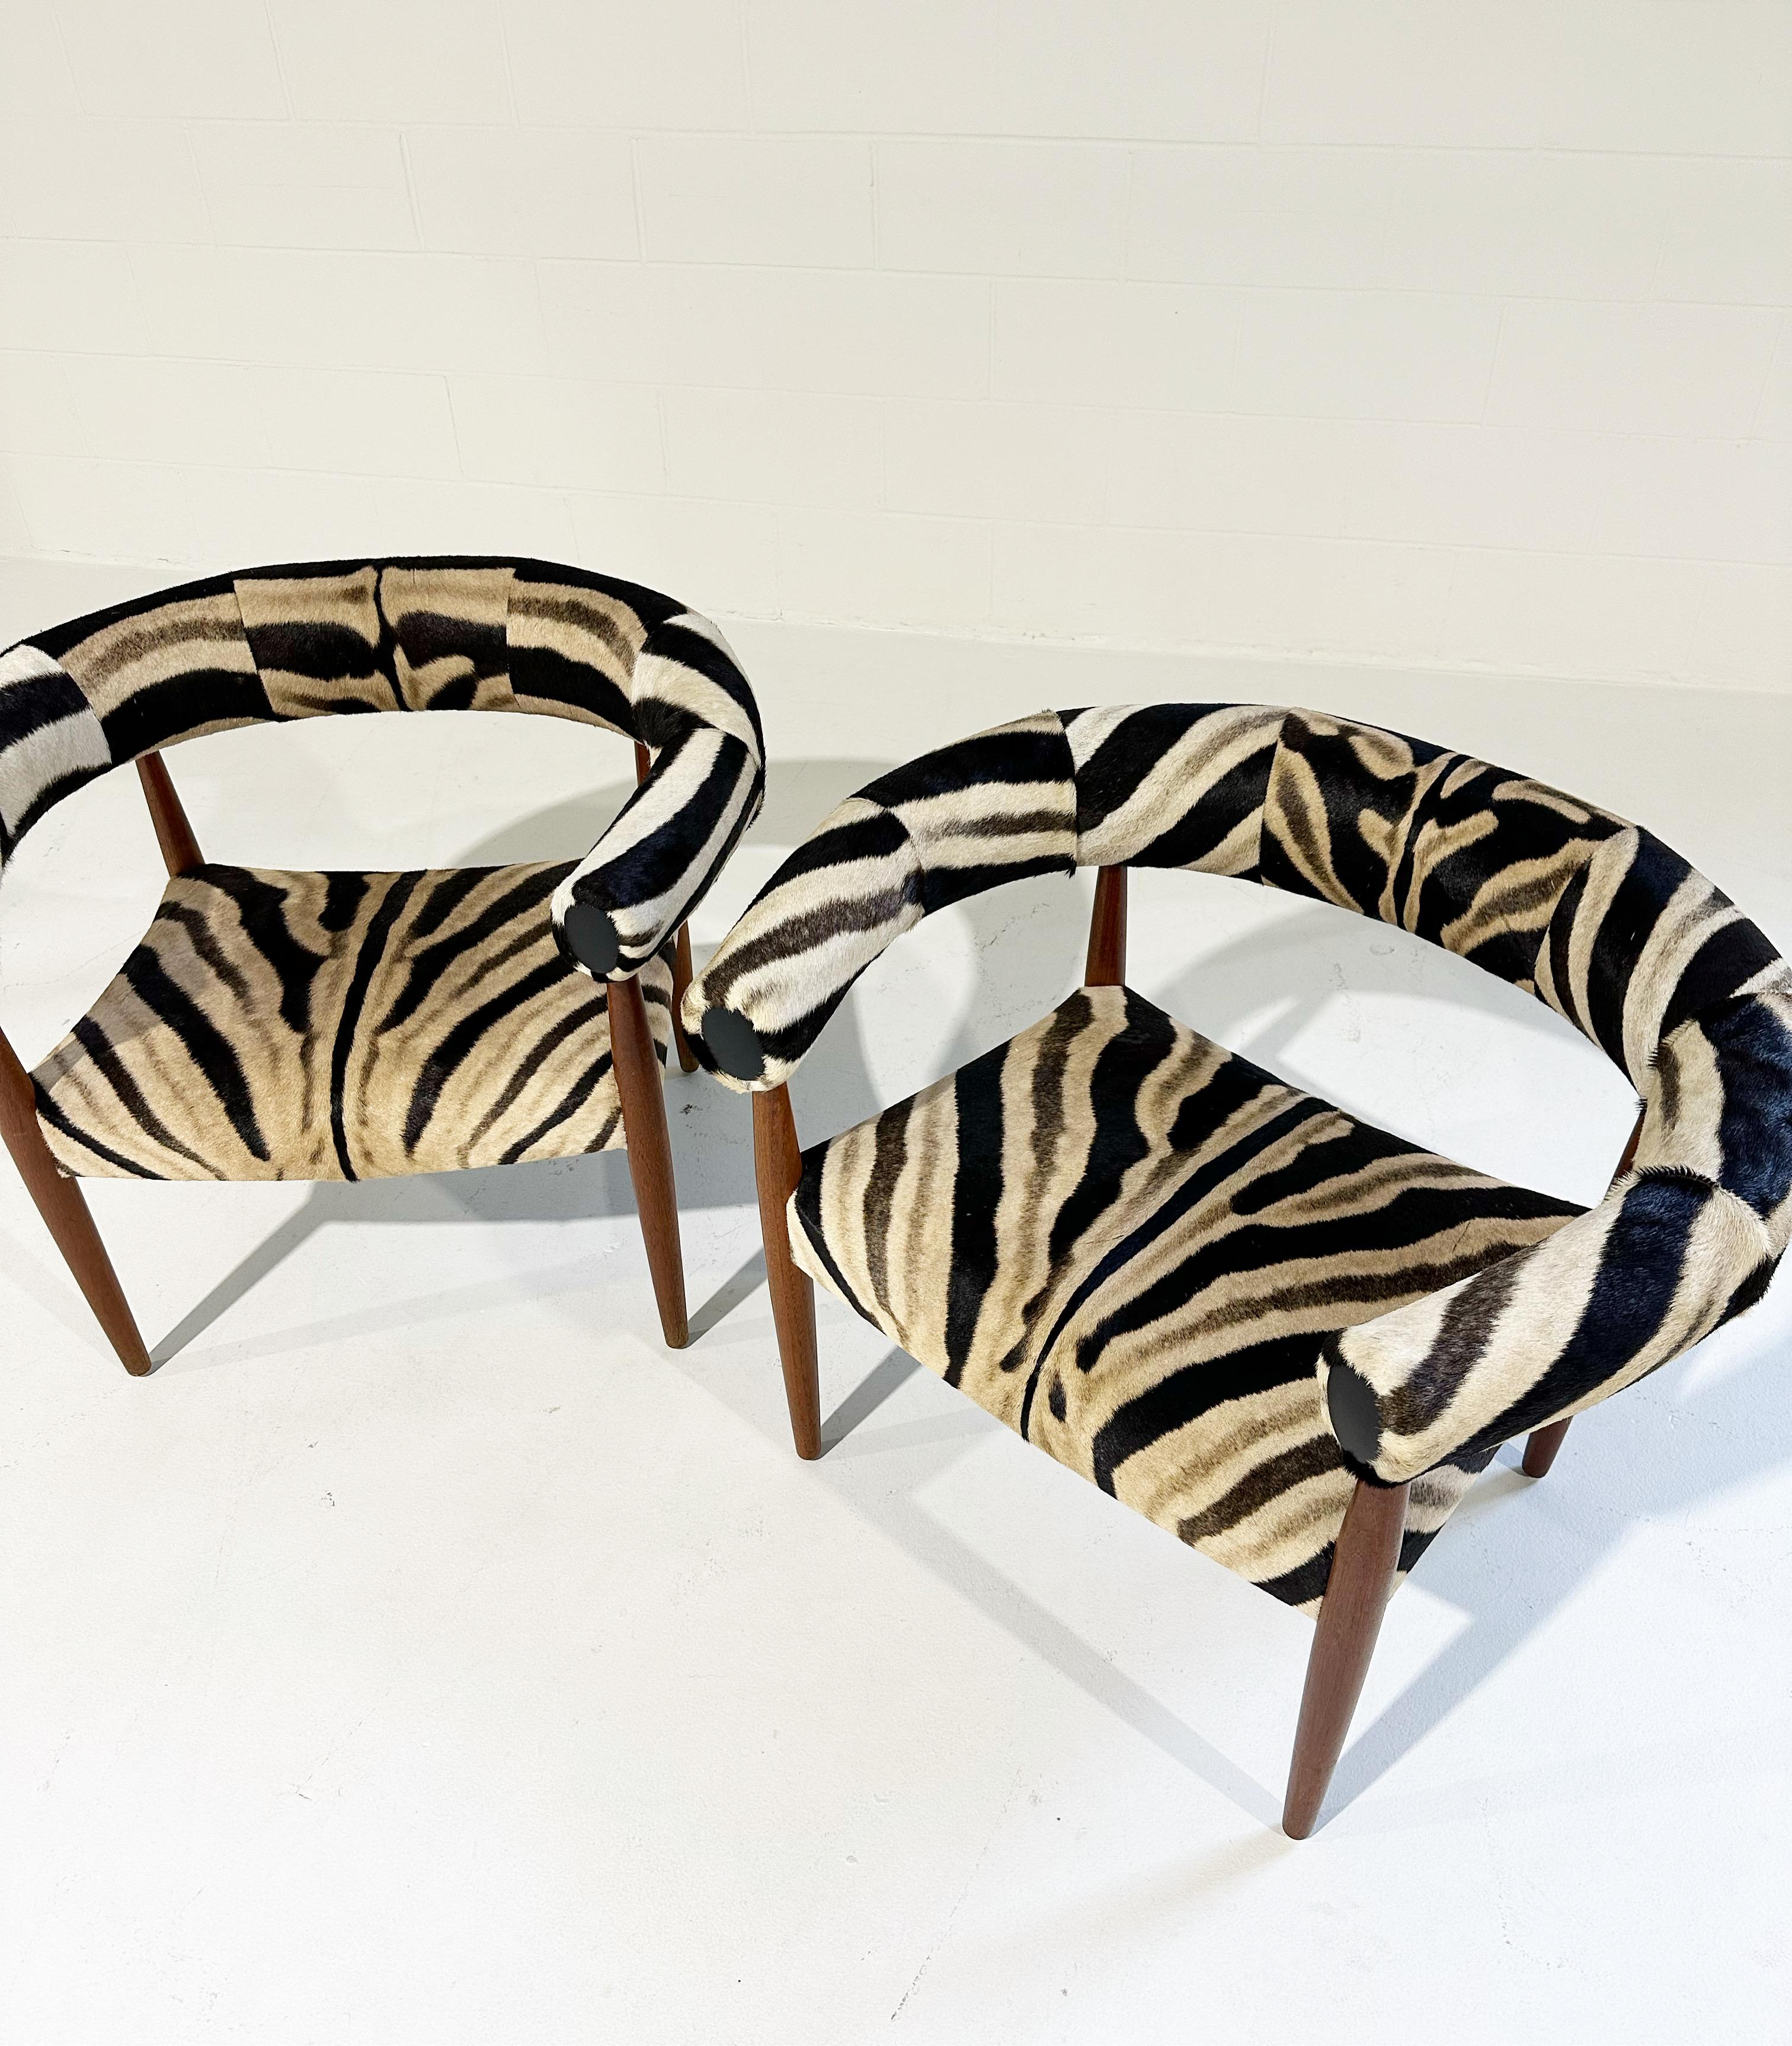 Vintage Nanna and Jorgen Ditzel Ring Lounge Chairs in Zebra Hide For Sale 2